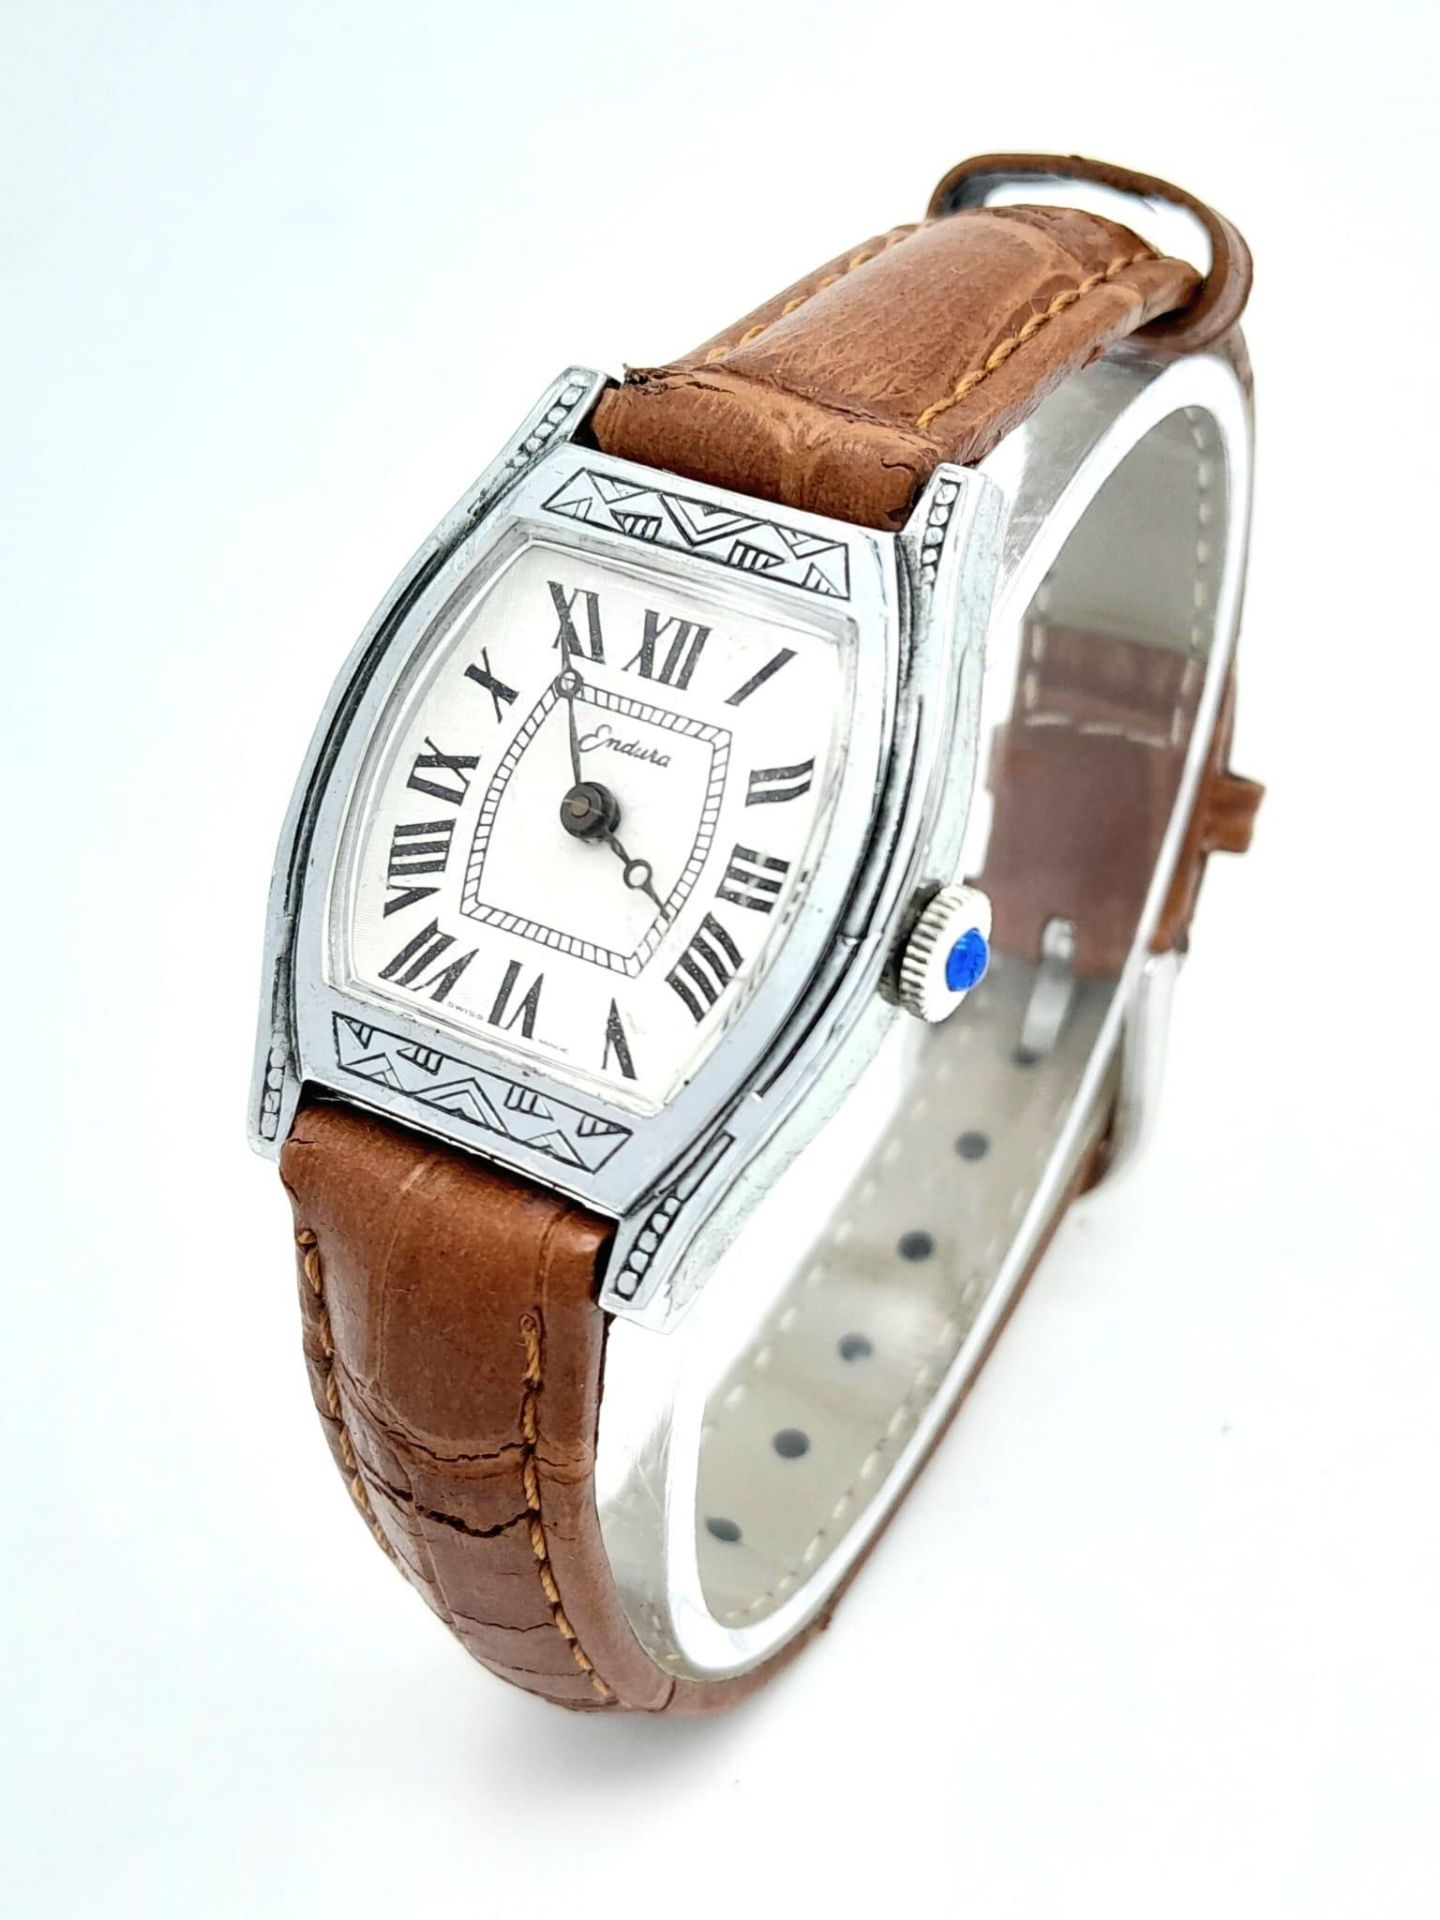 An Vintage Endura Mechanical Tank Ladies Watch. Brown leather strap. Stainless steel case - 28mm.